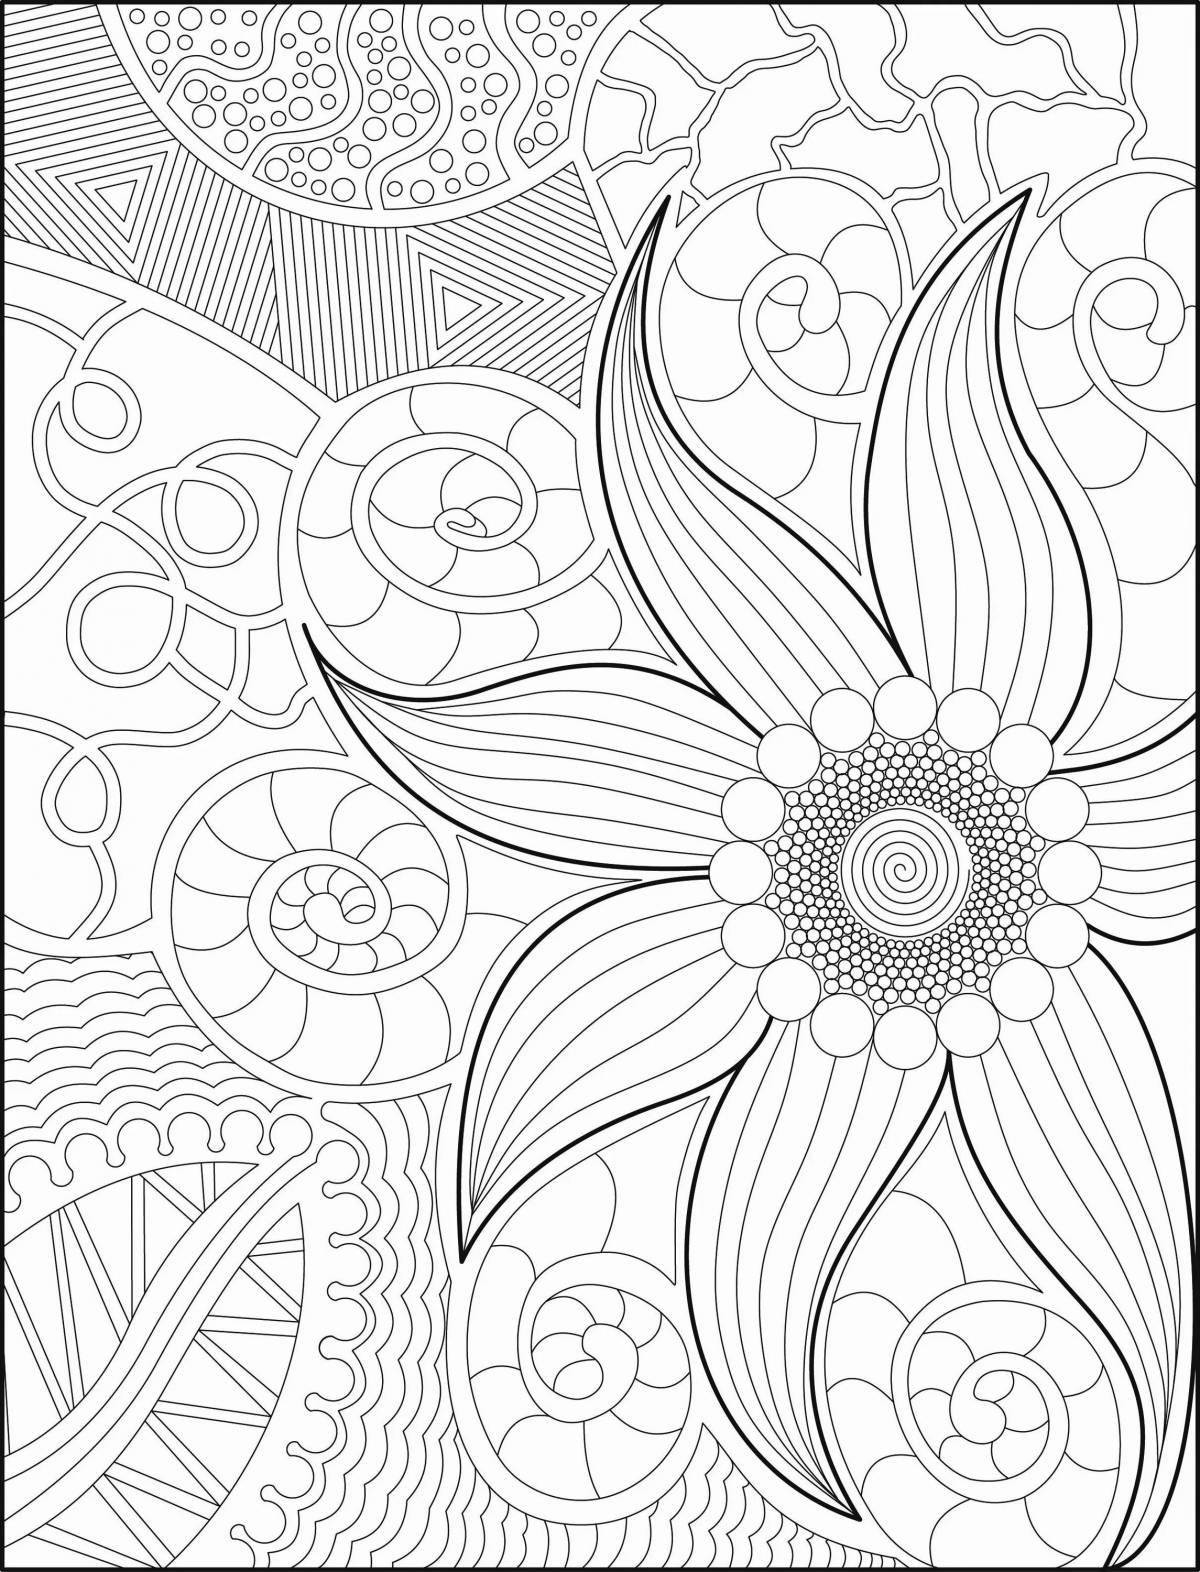 Bright coloring relax living patterns